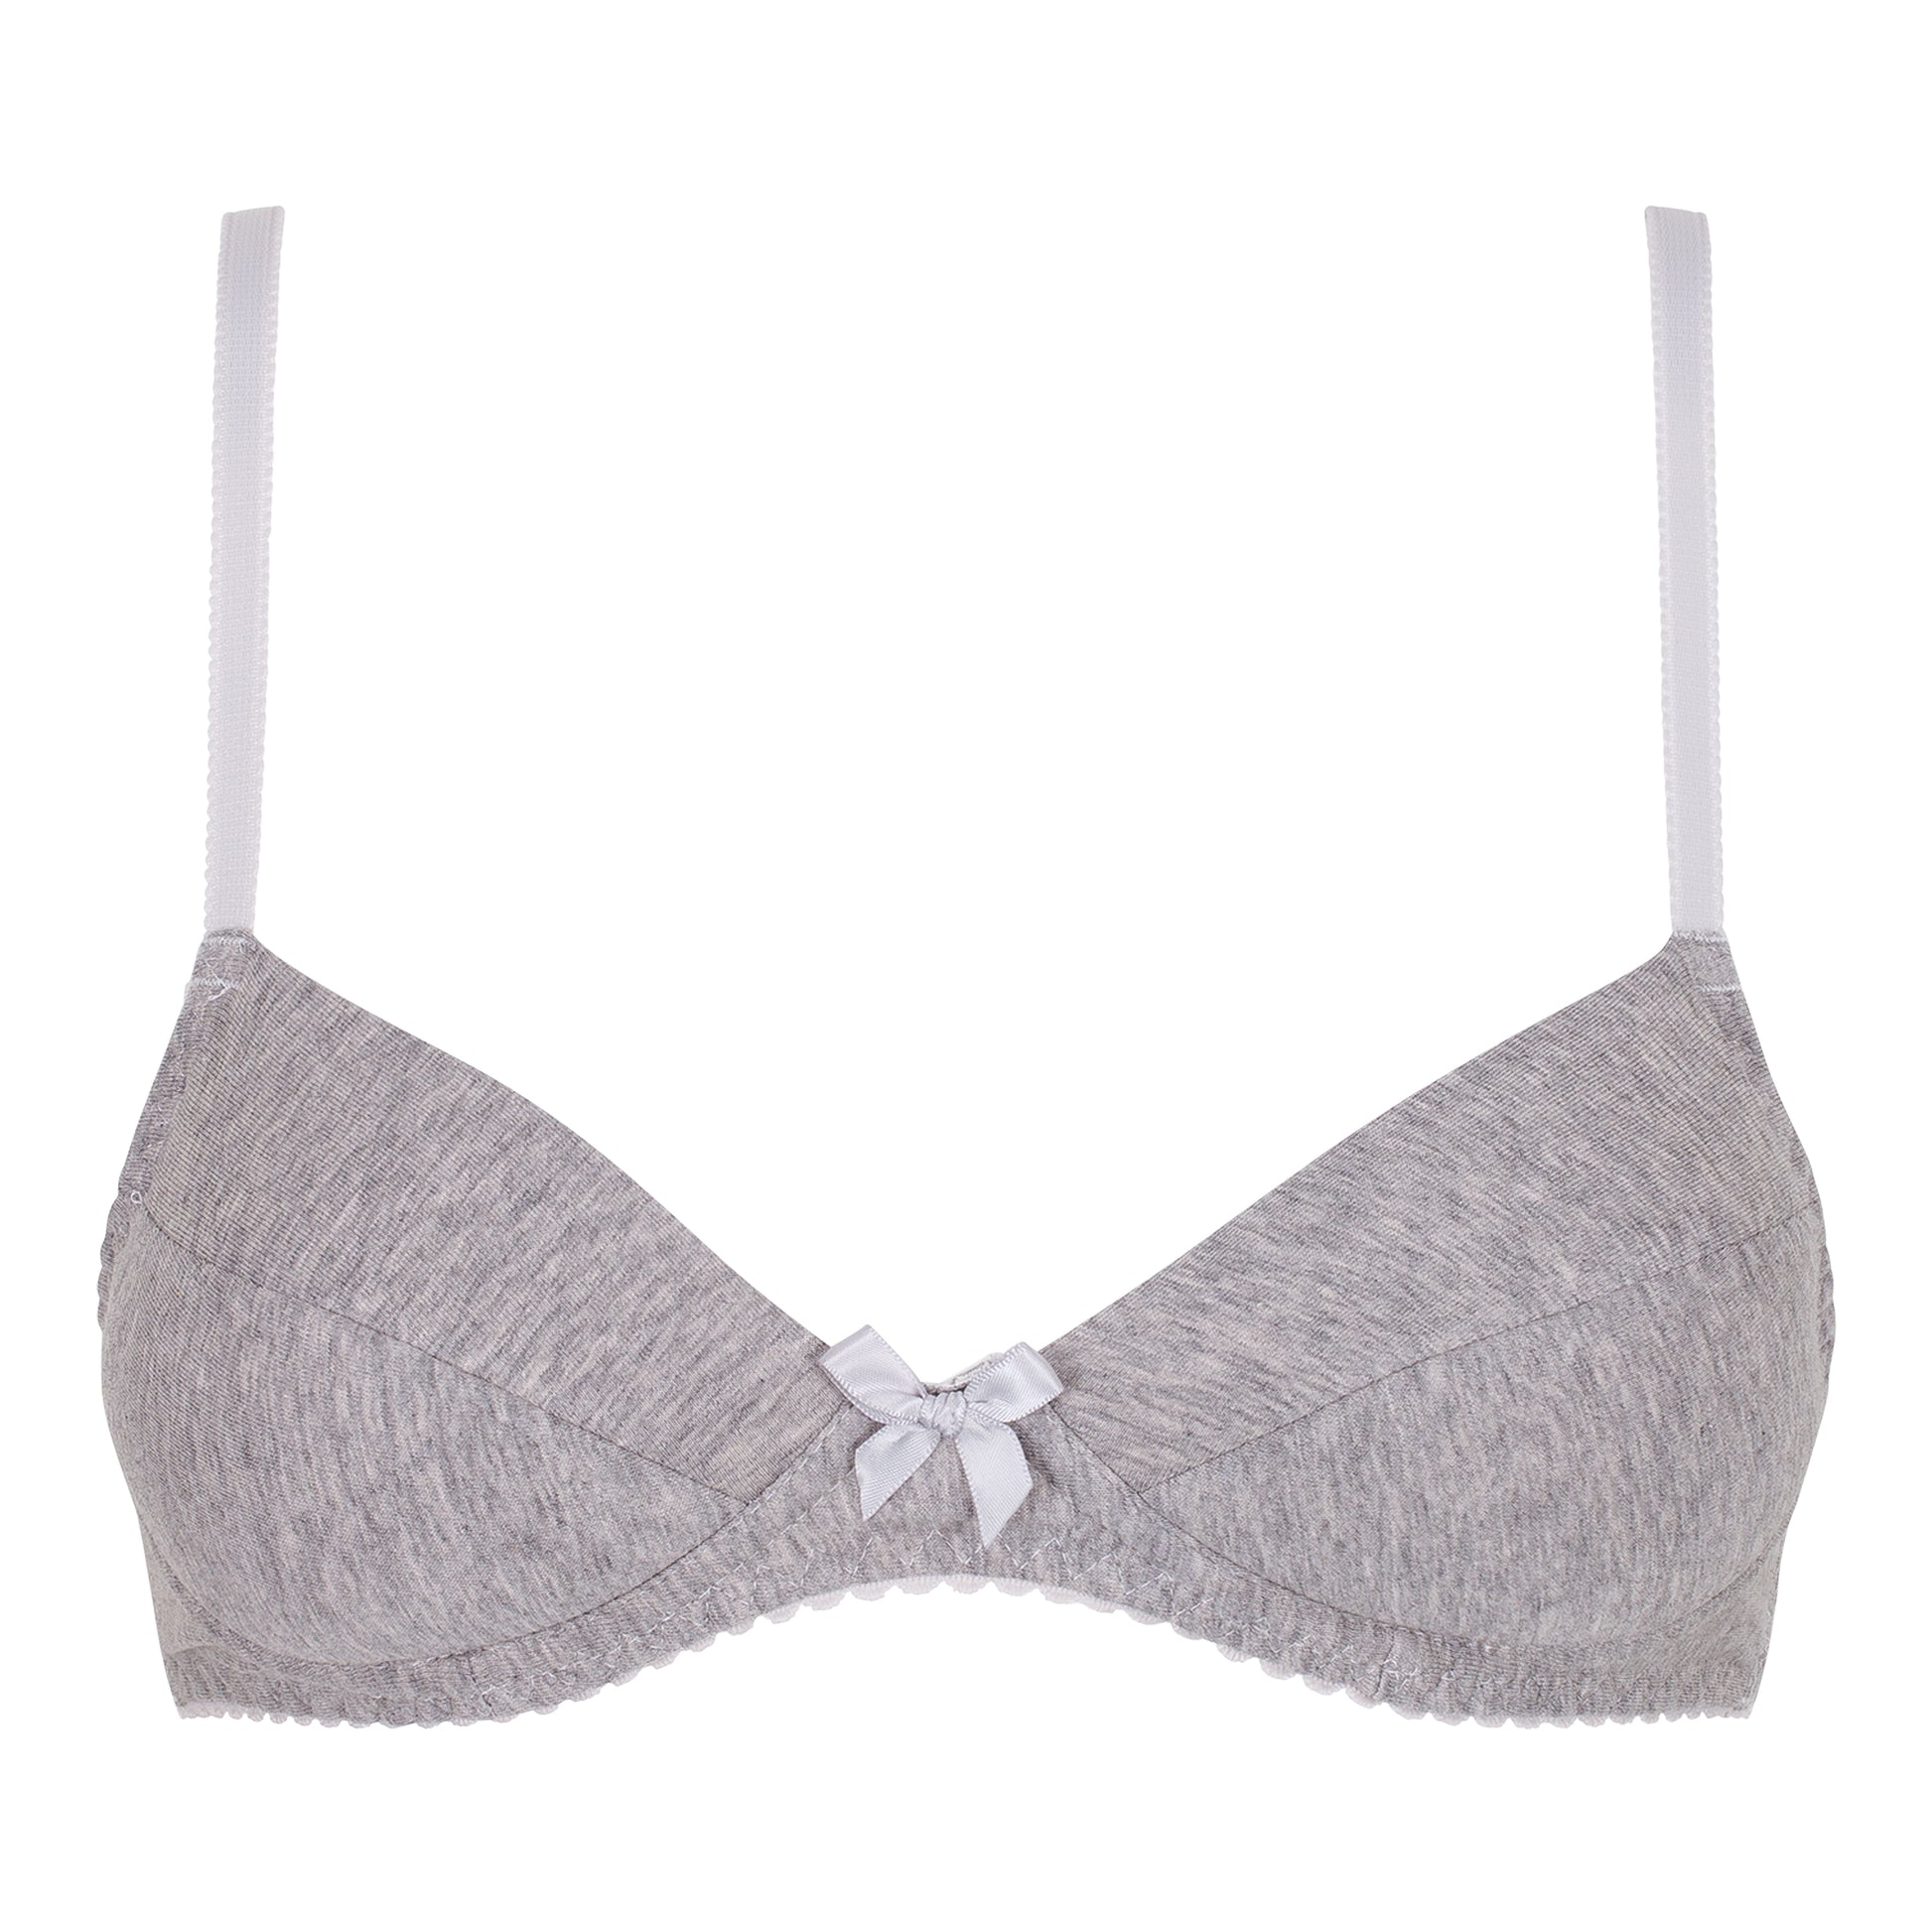 M&s Lace Cotton Rich Non-padded Full Cup Bra Cool Comfort? 34 36